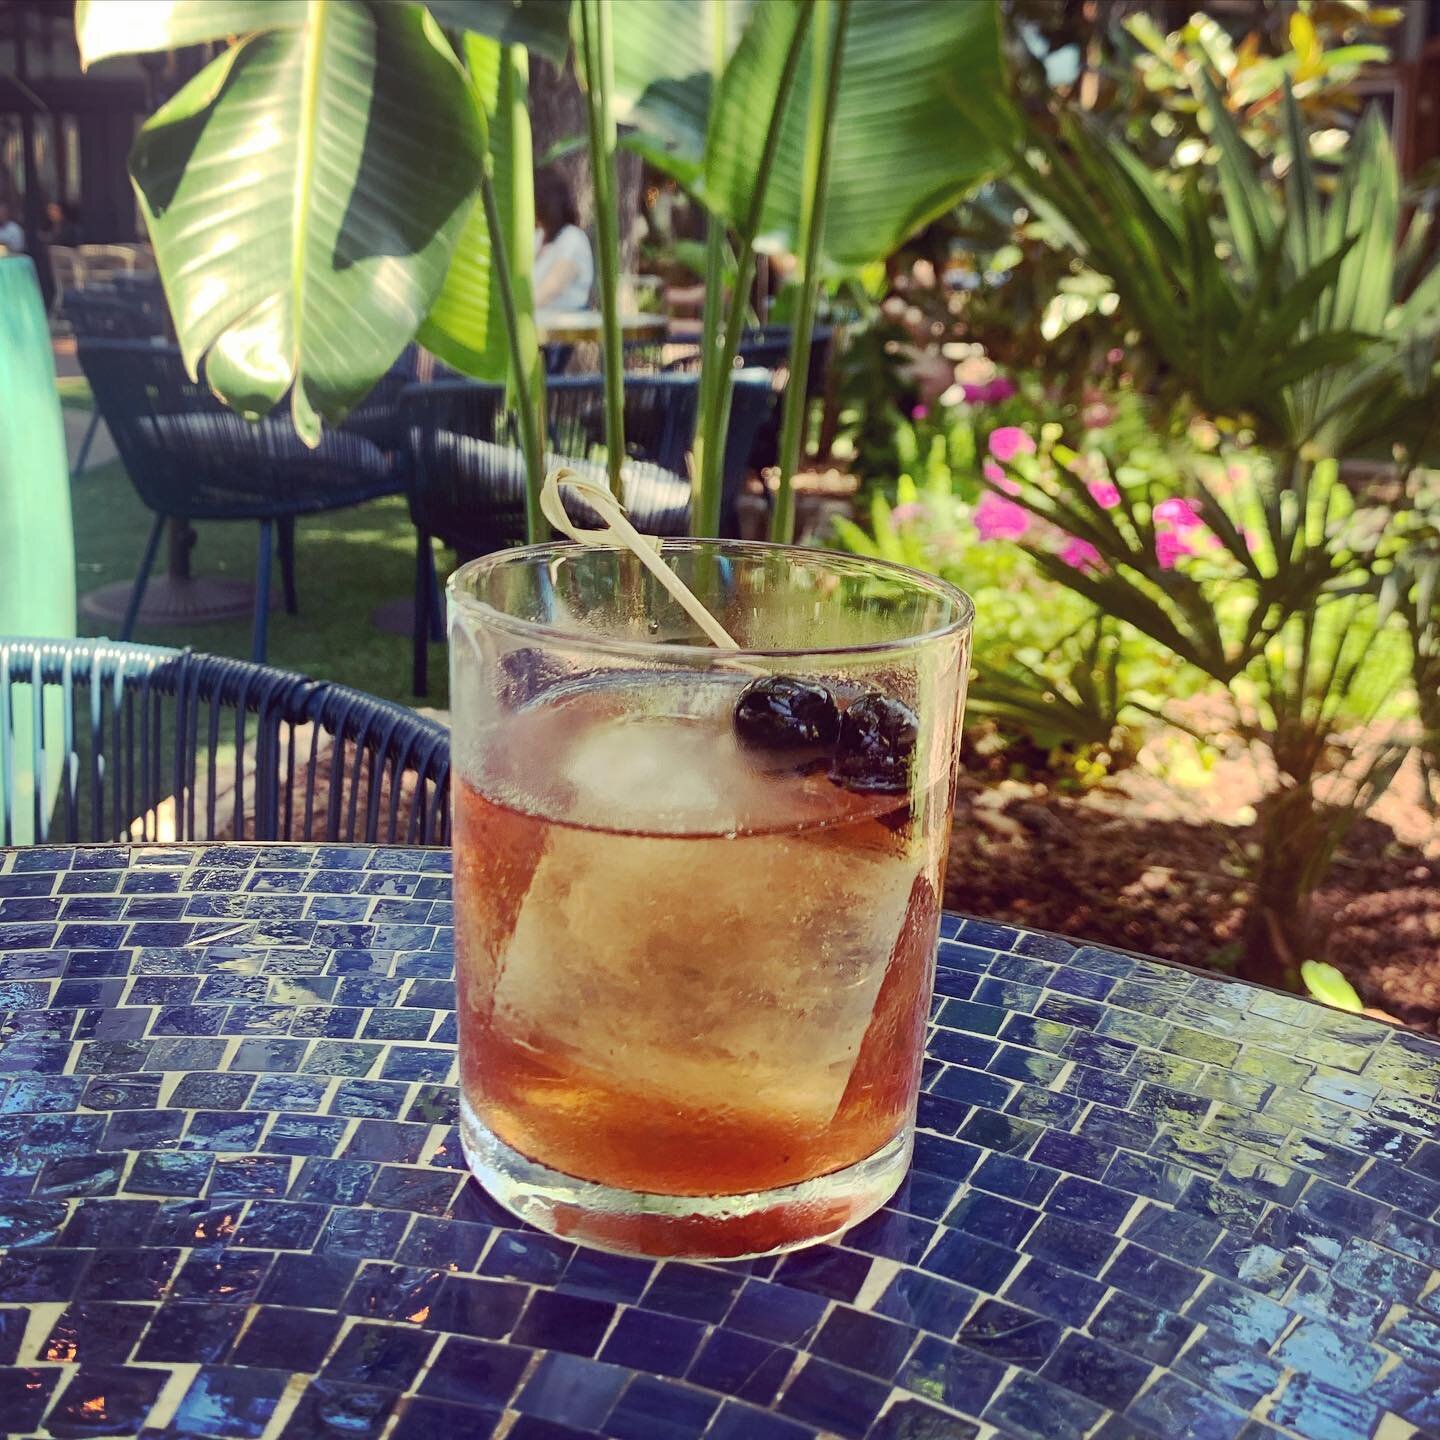 Happy Father&rsquo;s Day y&rsquo;all! Enjoy this complimentary cocktail today&mdash;just ask your server for one when you get here 🤩 Deets below:

KEVIN THE DAD 
rye whiskey. blended scotch. berry liqueur. dry vermouth. islay mist. 

In other words,